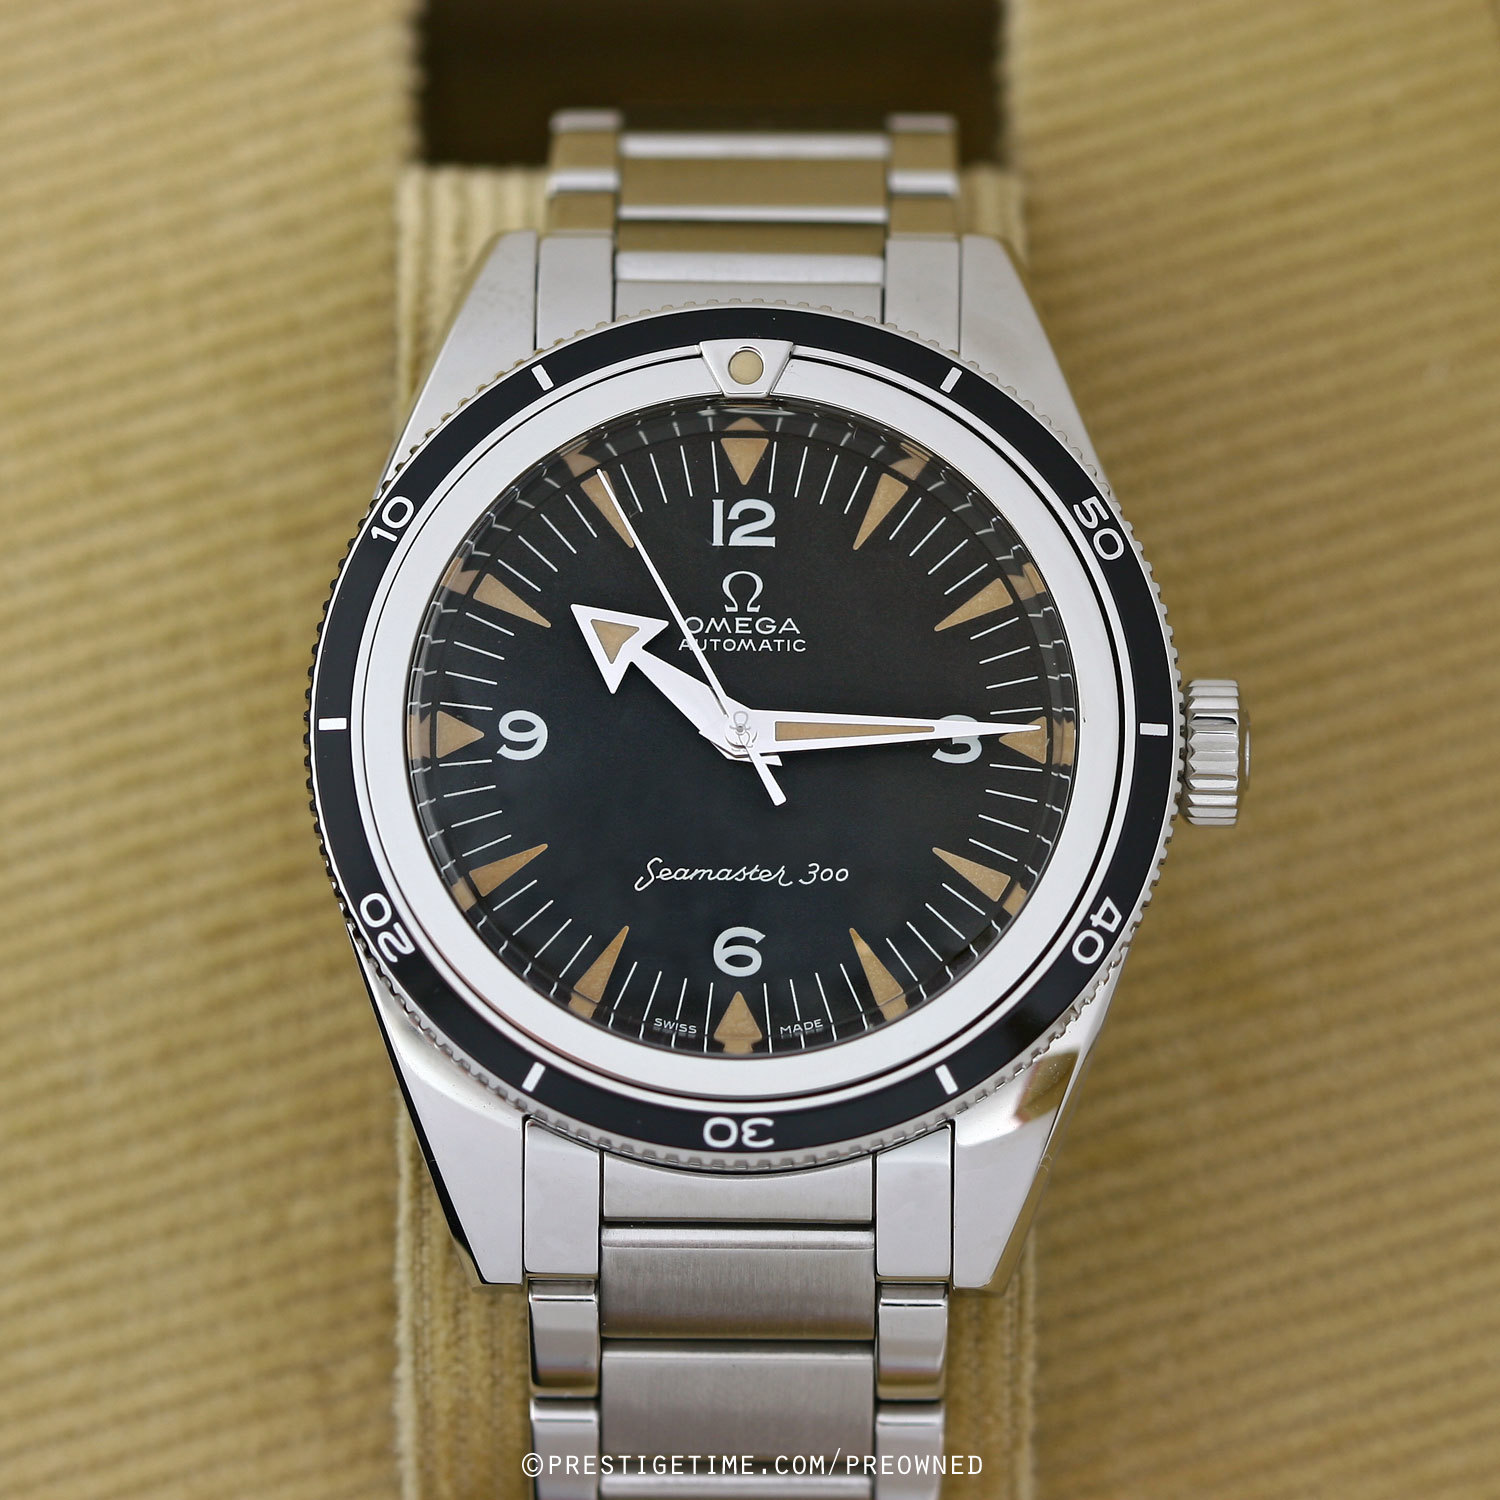 Pre-owned Omega Seamaster 300 1957 Trilogy 234.10.39.20.01.001